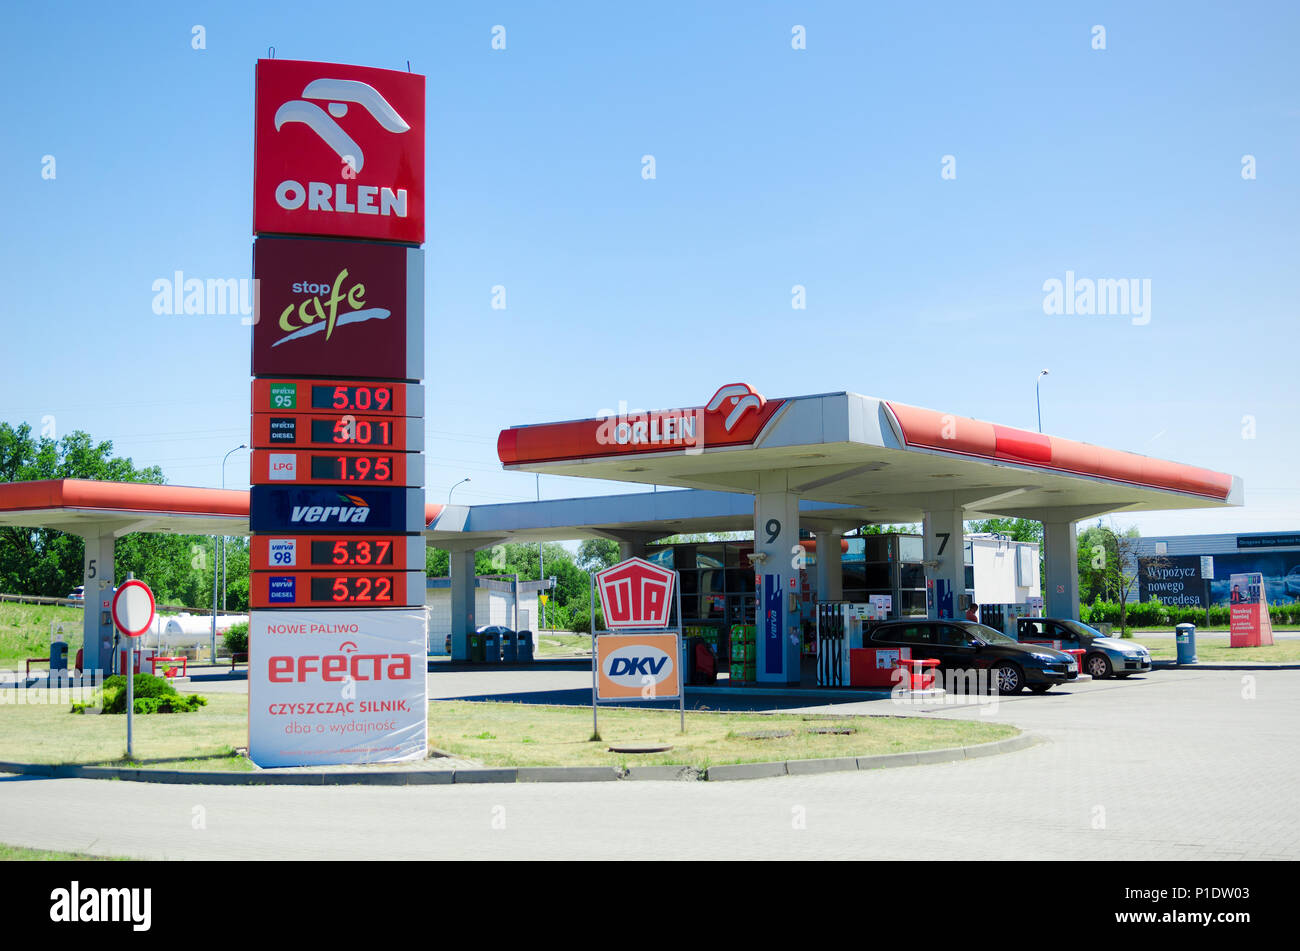 WROCLAW, POLAND - JUNE, 2018. Orlen gas station in Wroclaw, Poland. Orlen is the largest Polish company. Stock Photo